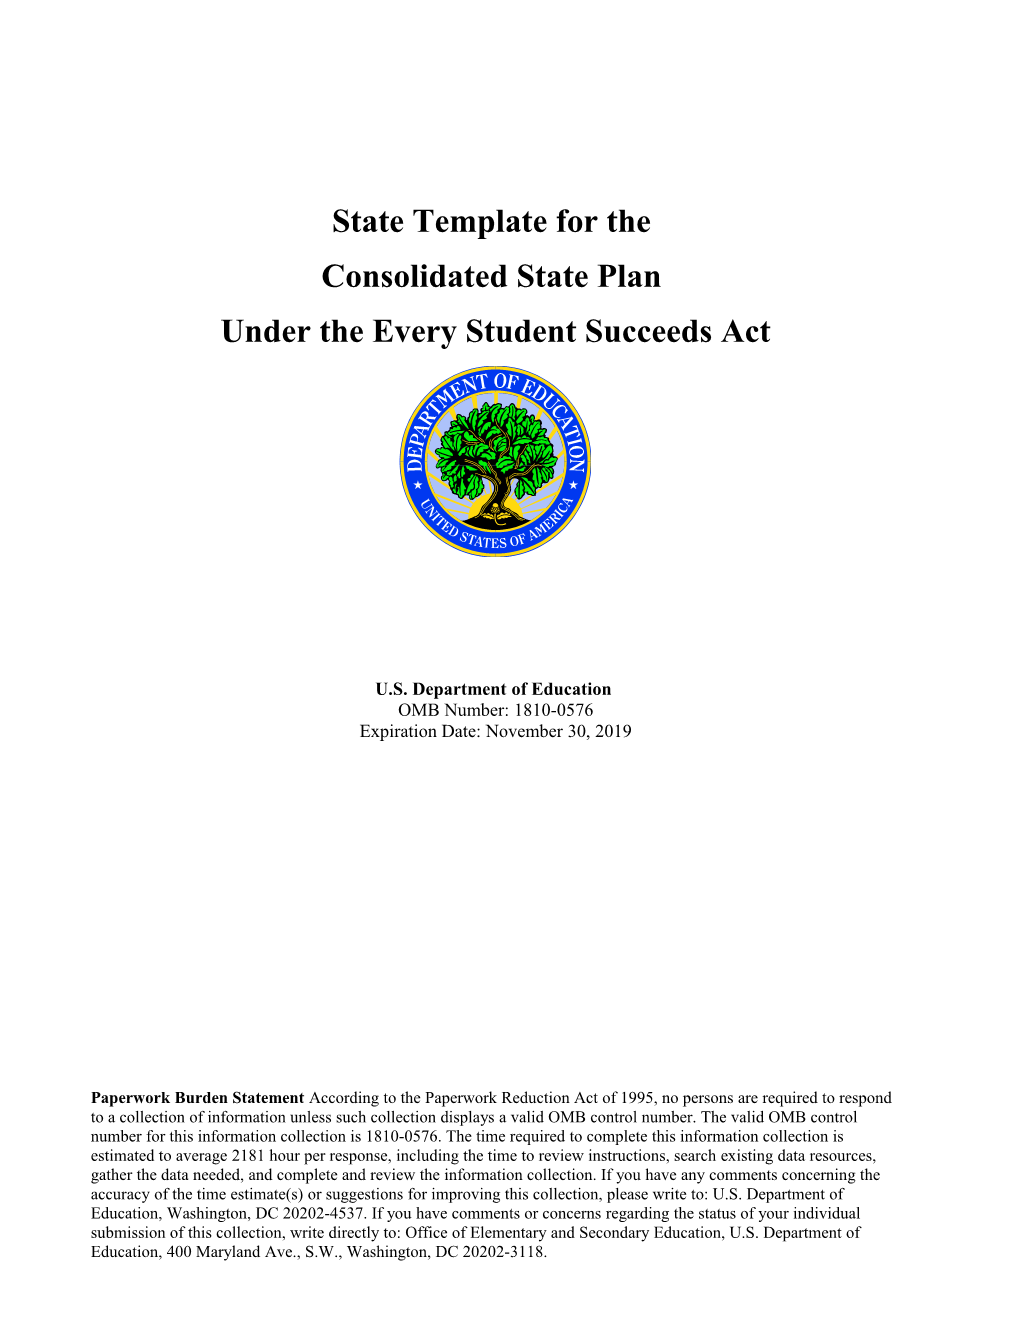 ESSA Consolidated State Plan December 19, 2016 (MS Word)